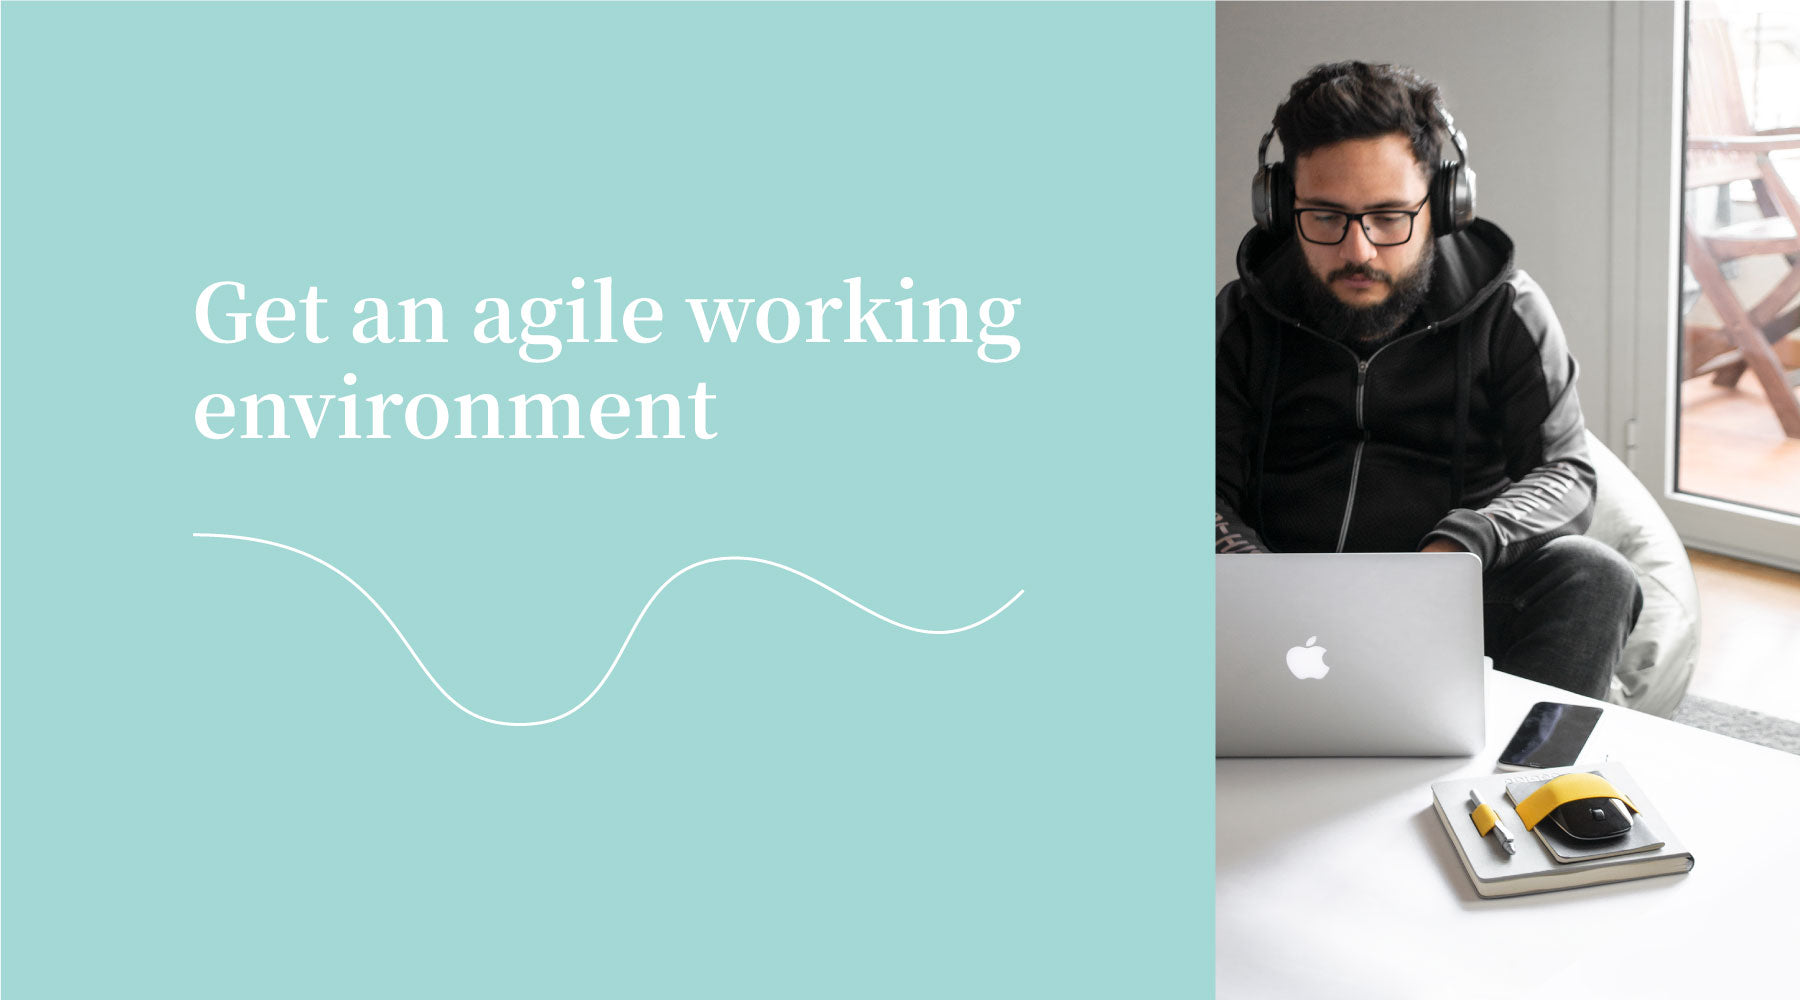 Get an agile working environment